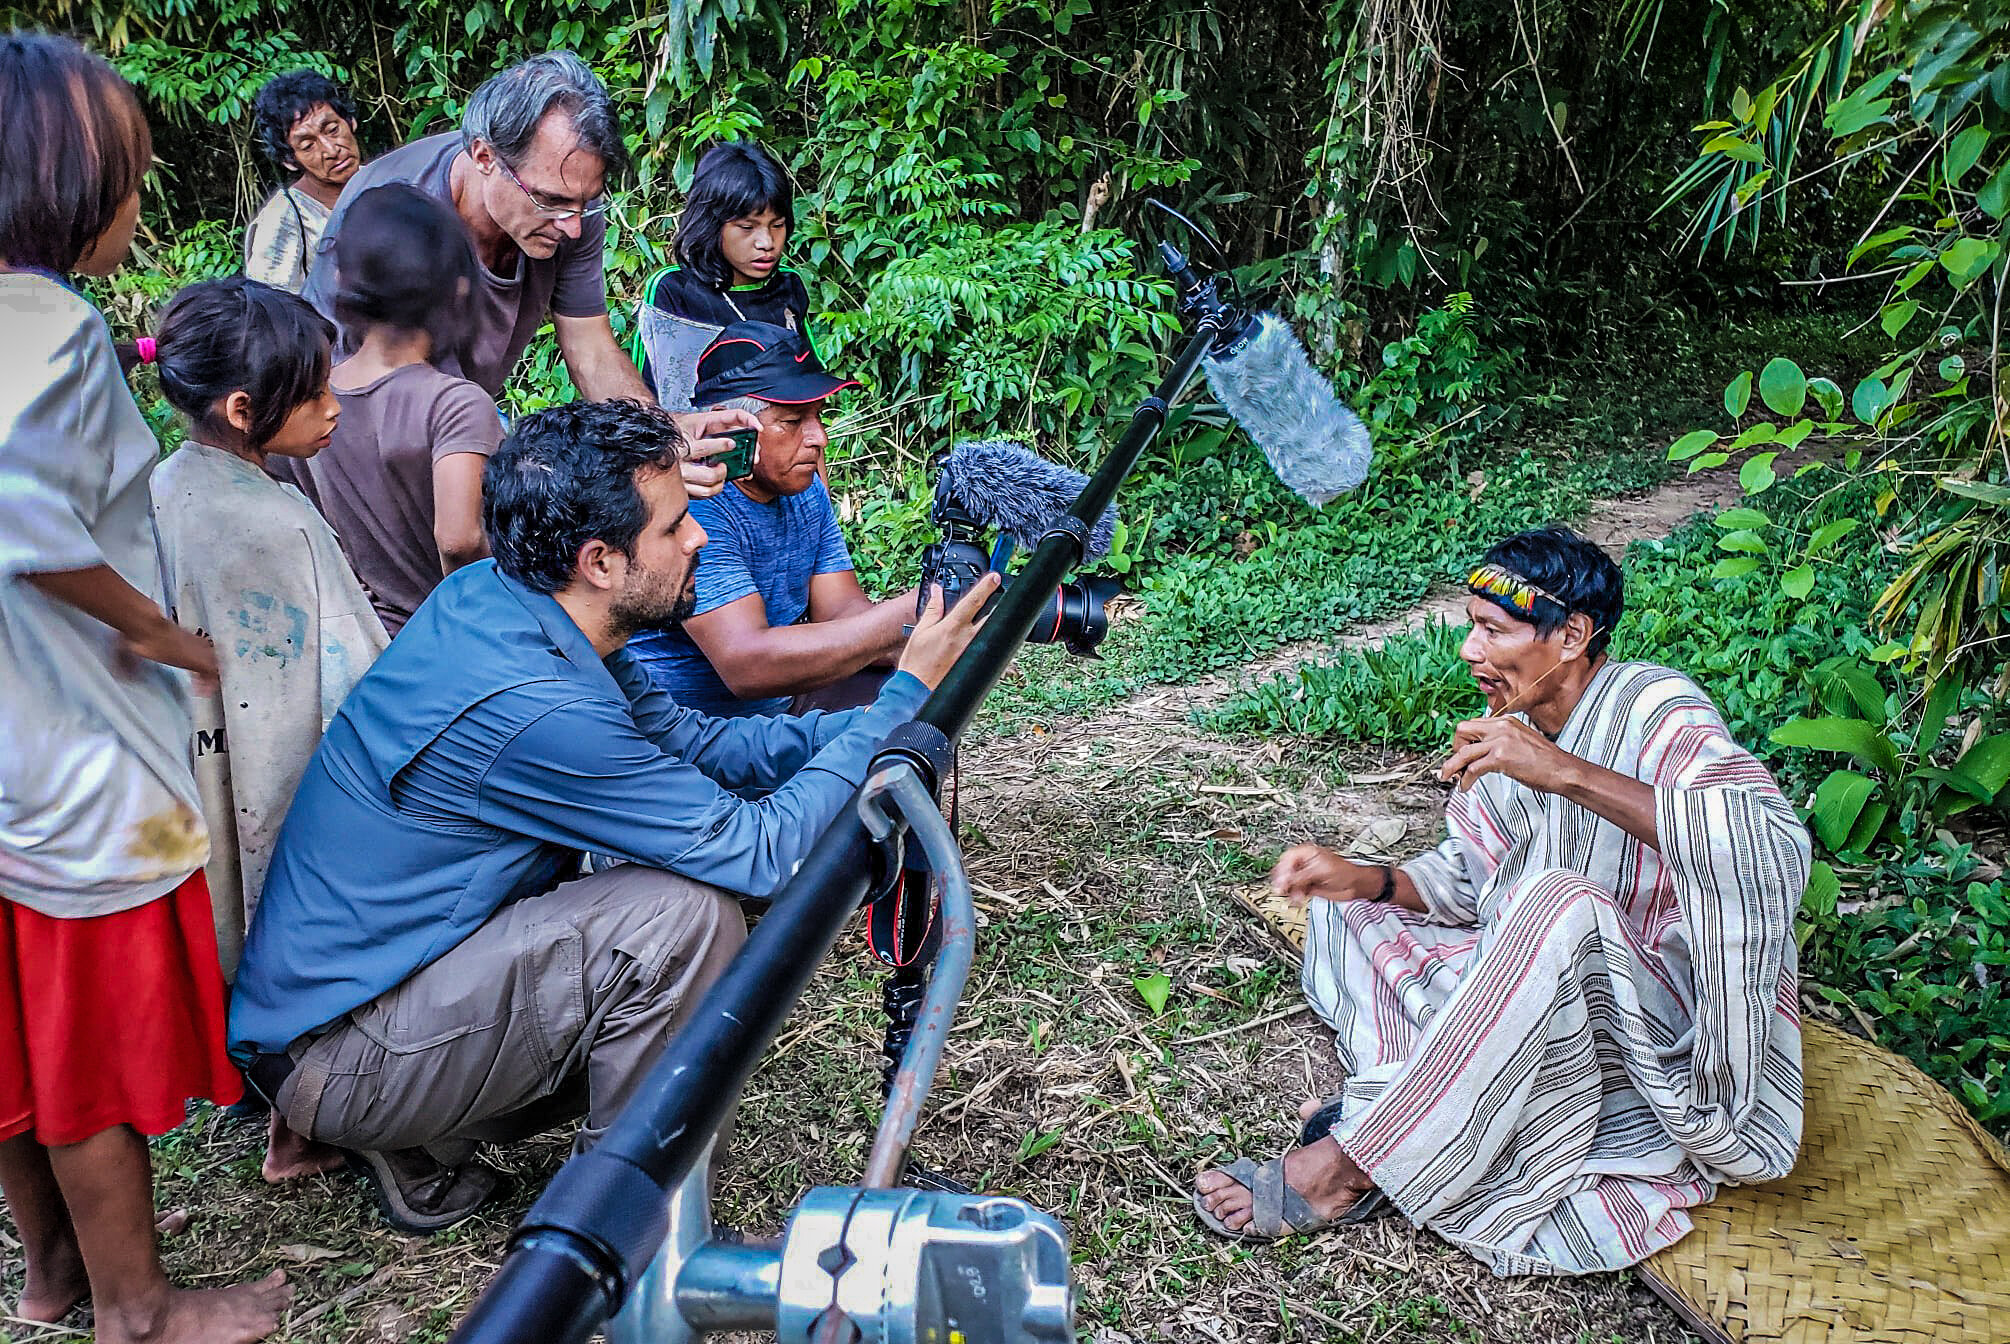 Filming a Matsigenka Shaman within the village of Tayakome inside the intangible zone of Manu National Park.